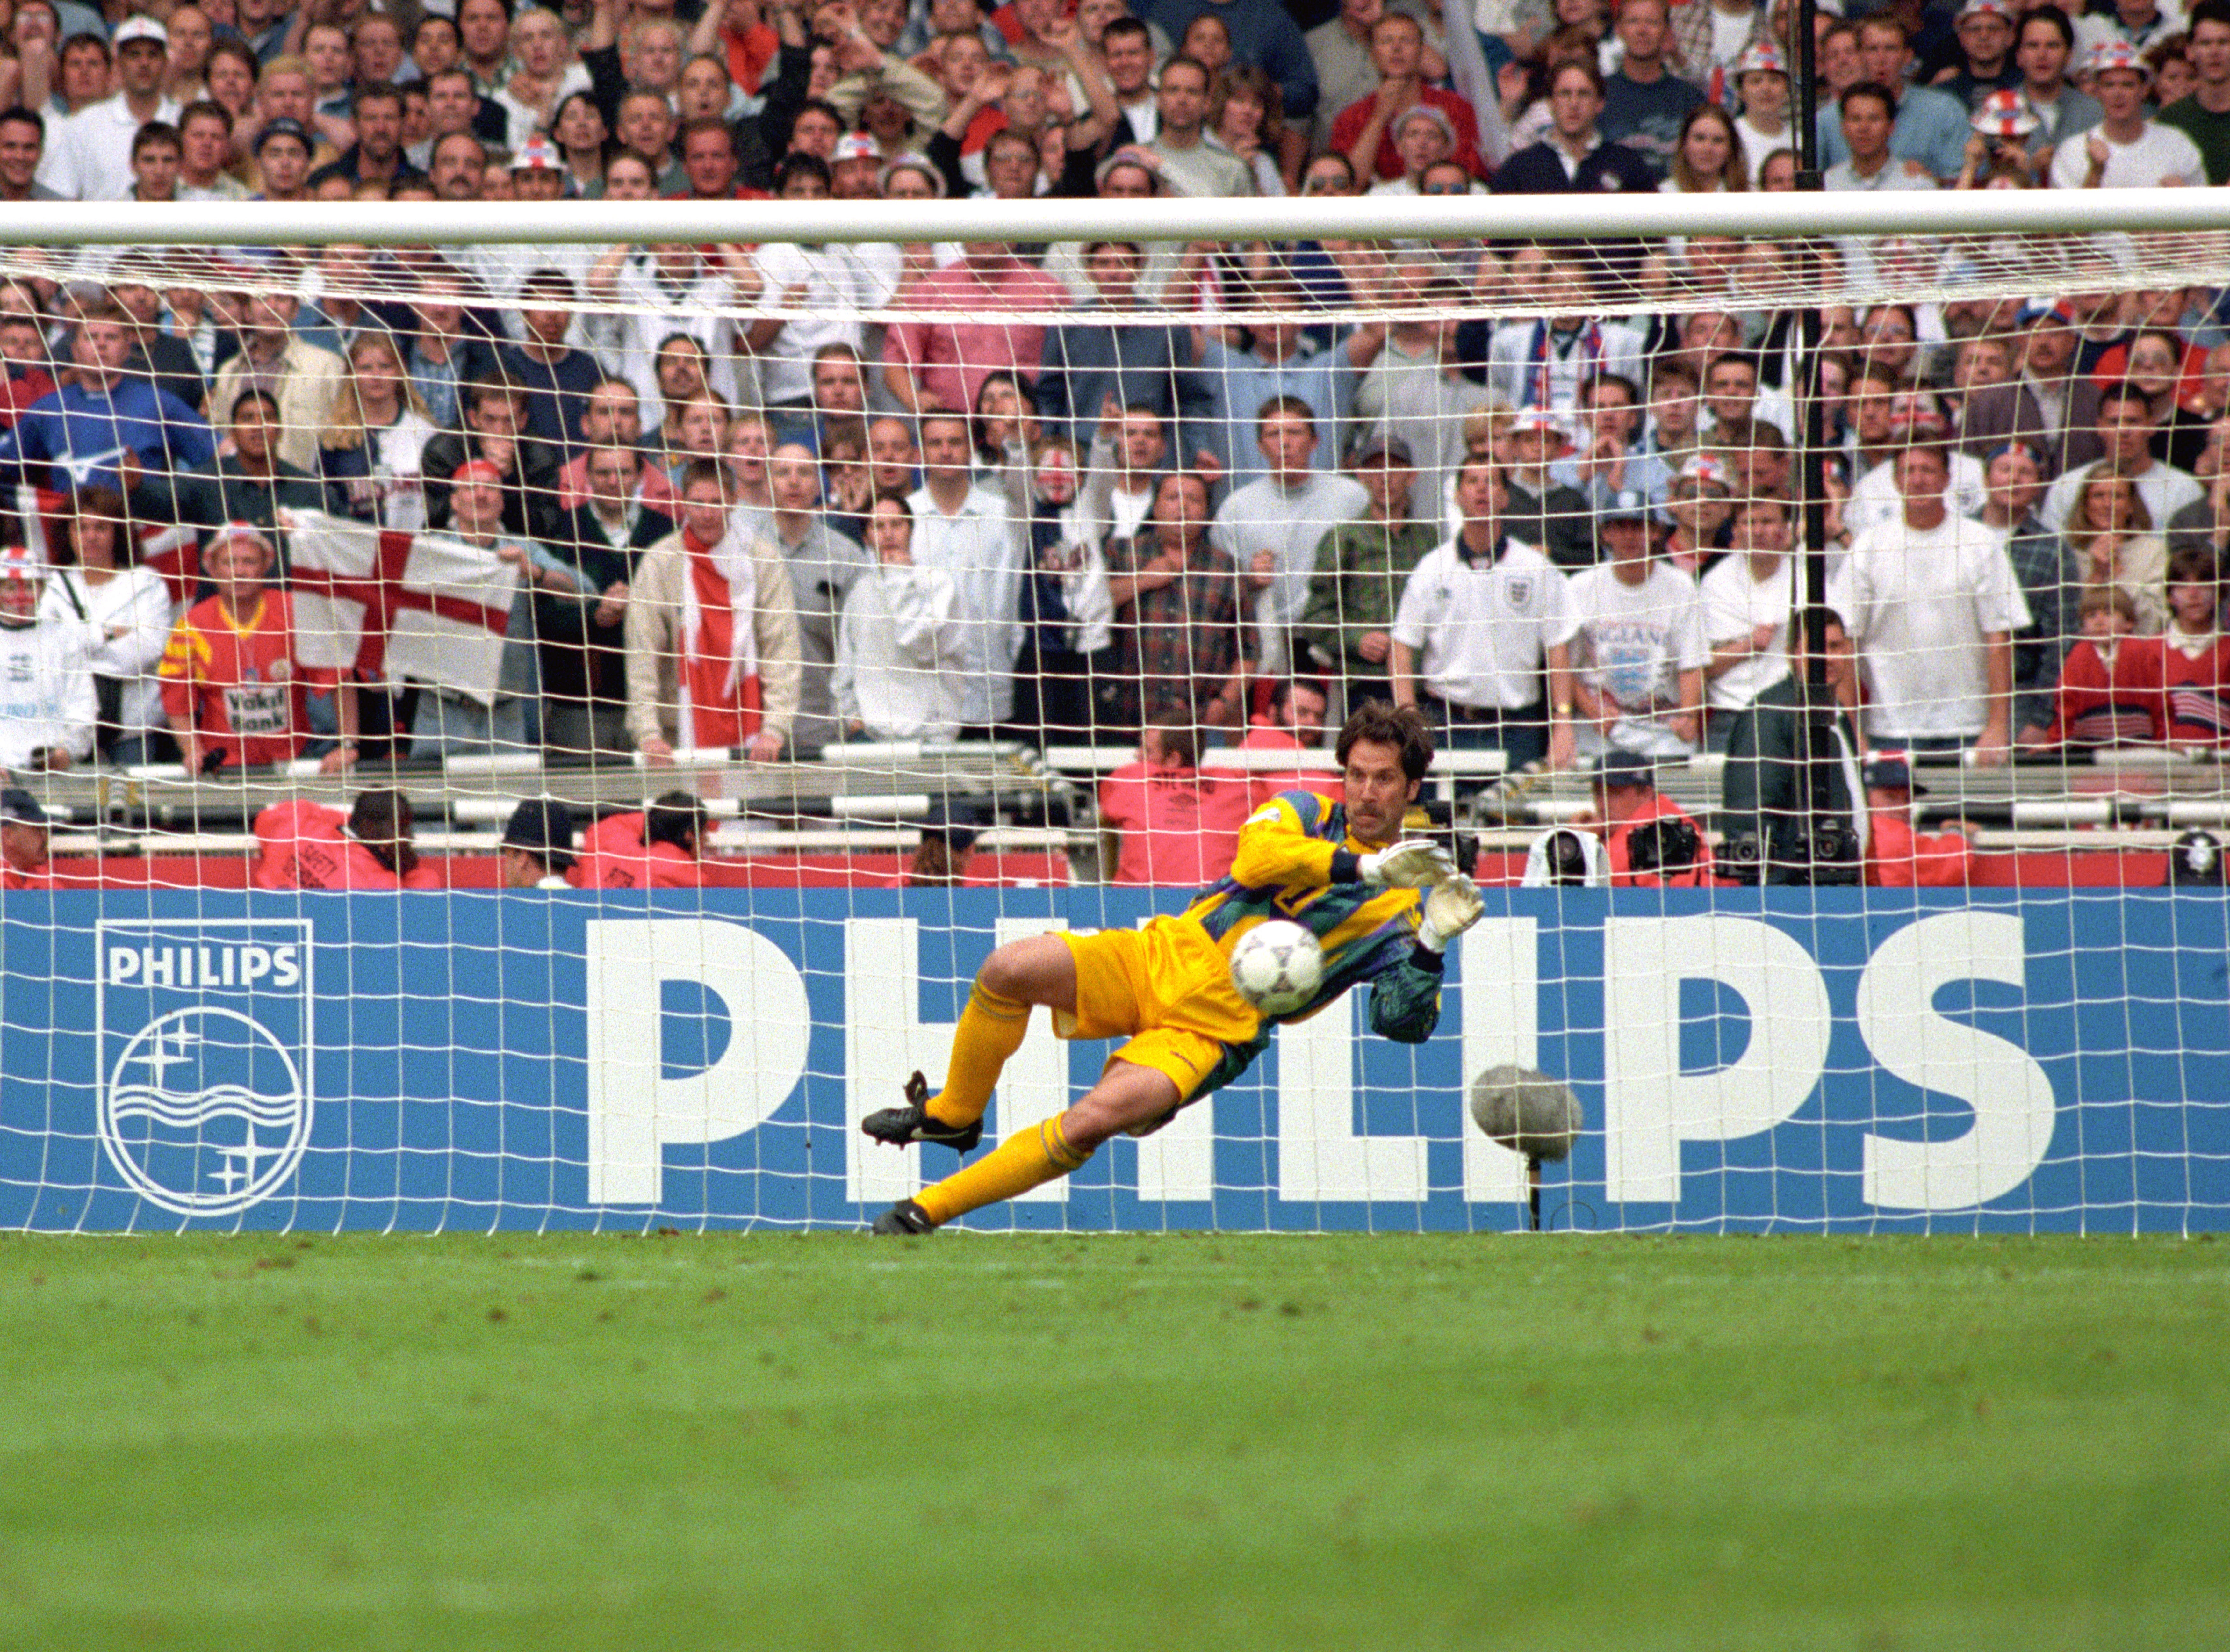 David Seaman starred in England’s Euro ’96 quarter-final shoot-out victory over Spain (Adam Butler/PA)